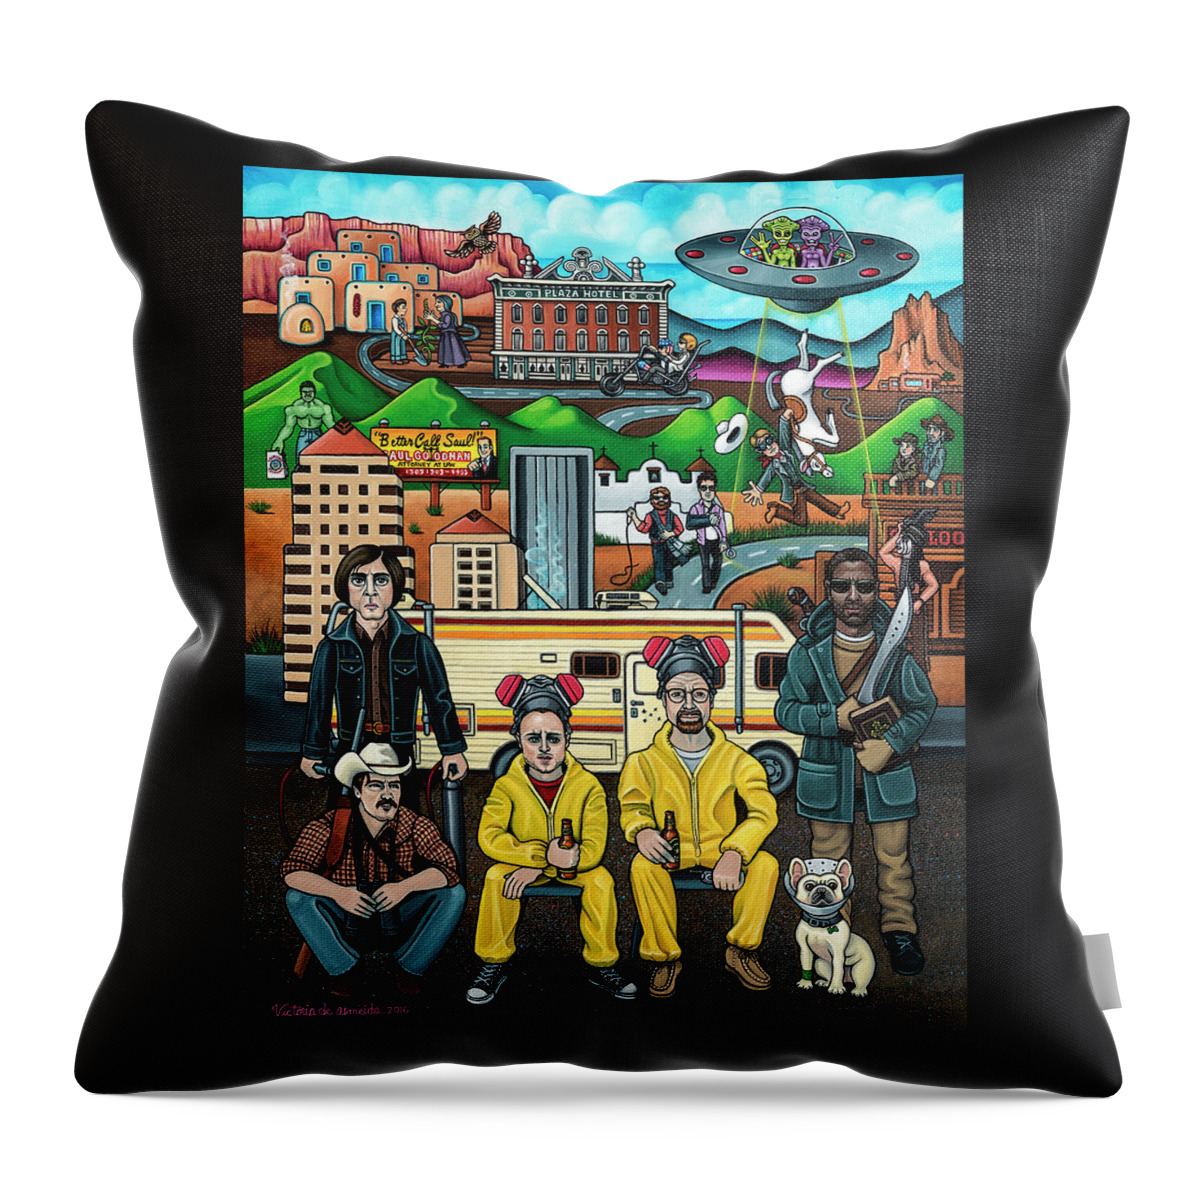 Hispanic Art Throw Pillow featuring the painting Shooting Stars In New Mexico by Victoria De Almeida